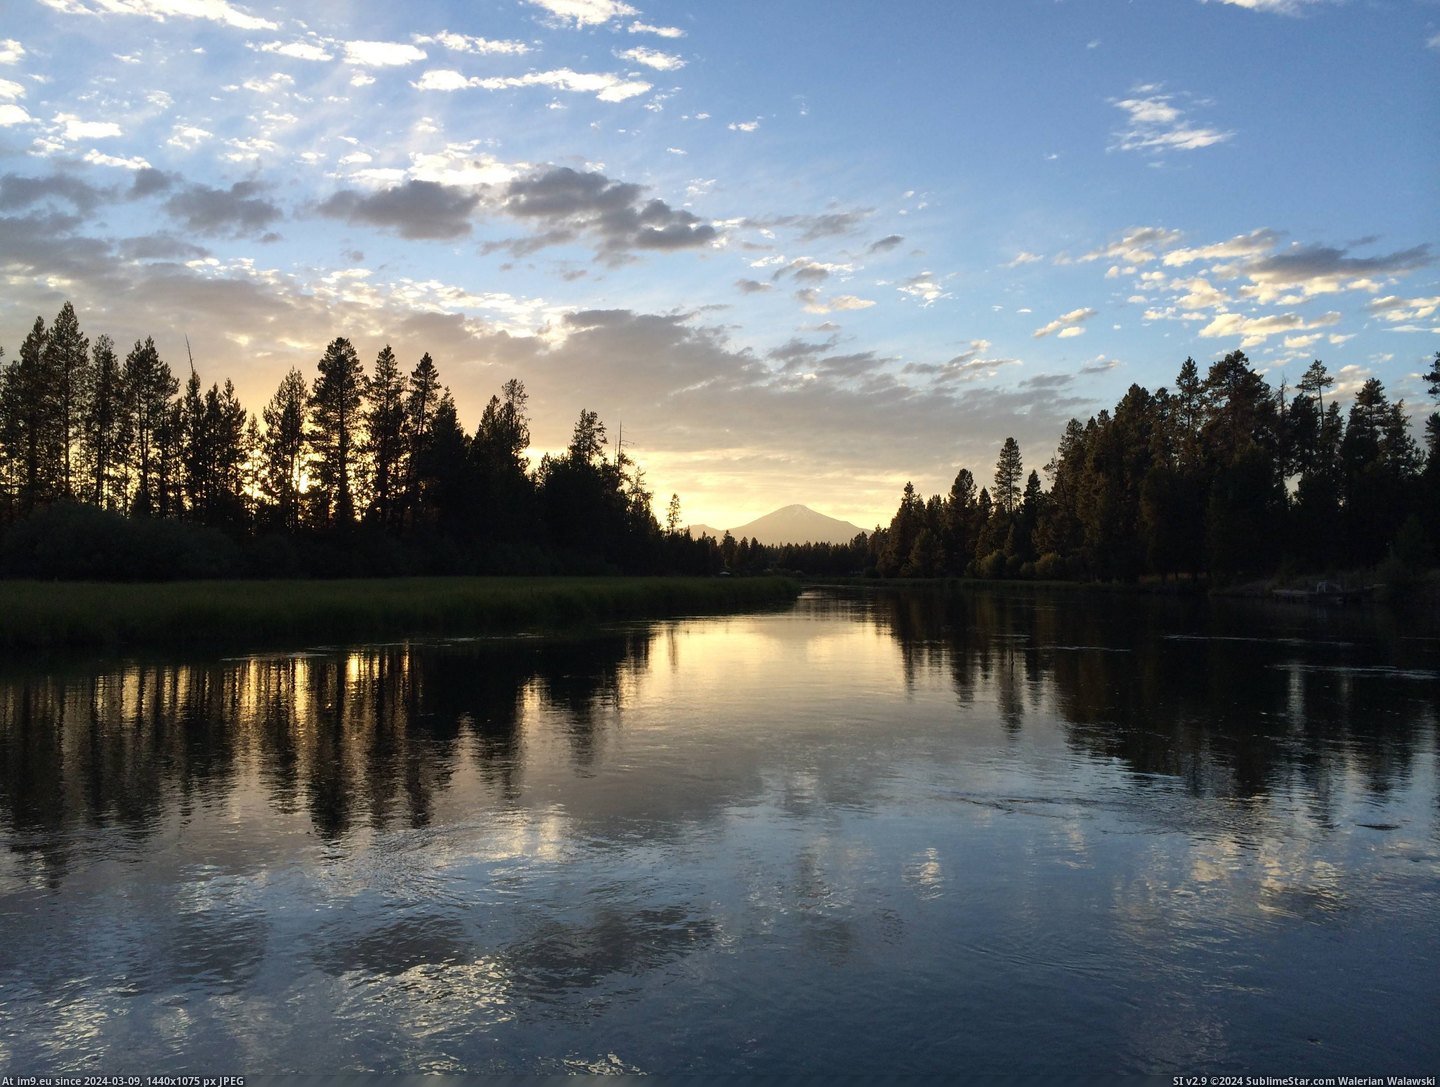 #Pretty #Turned #Fishing #Nicely #Iphone #Bachelor [Earthporn] Went fishing and all I had to take pictures was my iPhone.. Still turned out pretty nicely! View of Mt Bachelor from Pic. (Image of album My r/EARTHPORN favs))